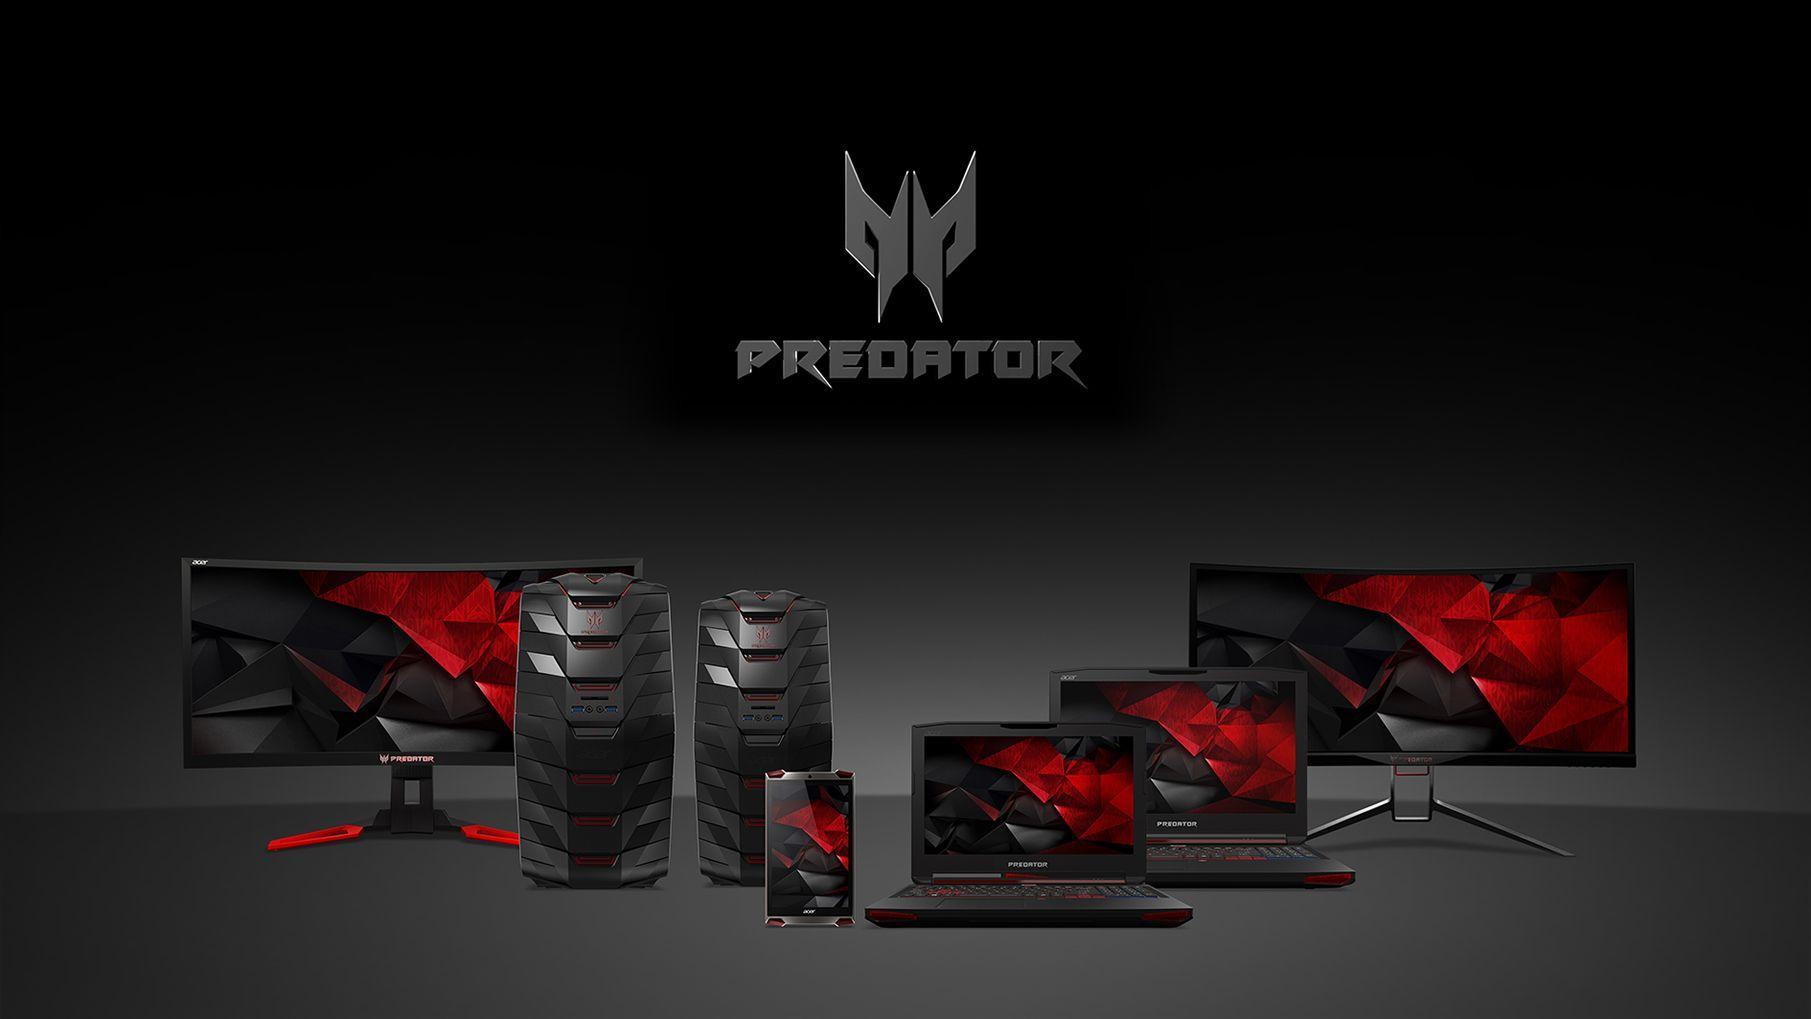 A look at the new Acer Predator Range